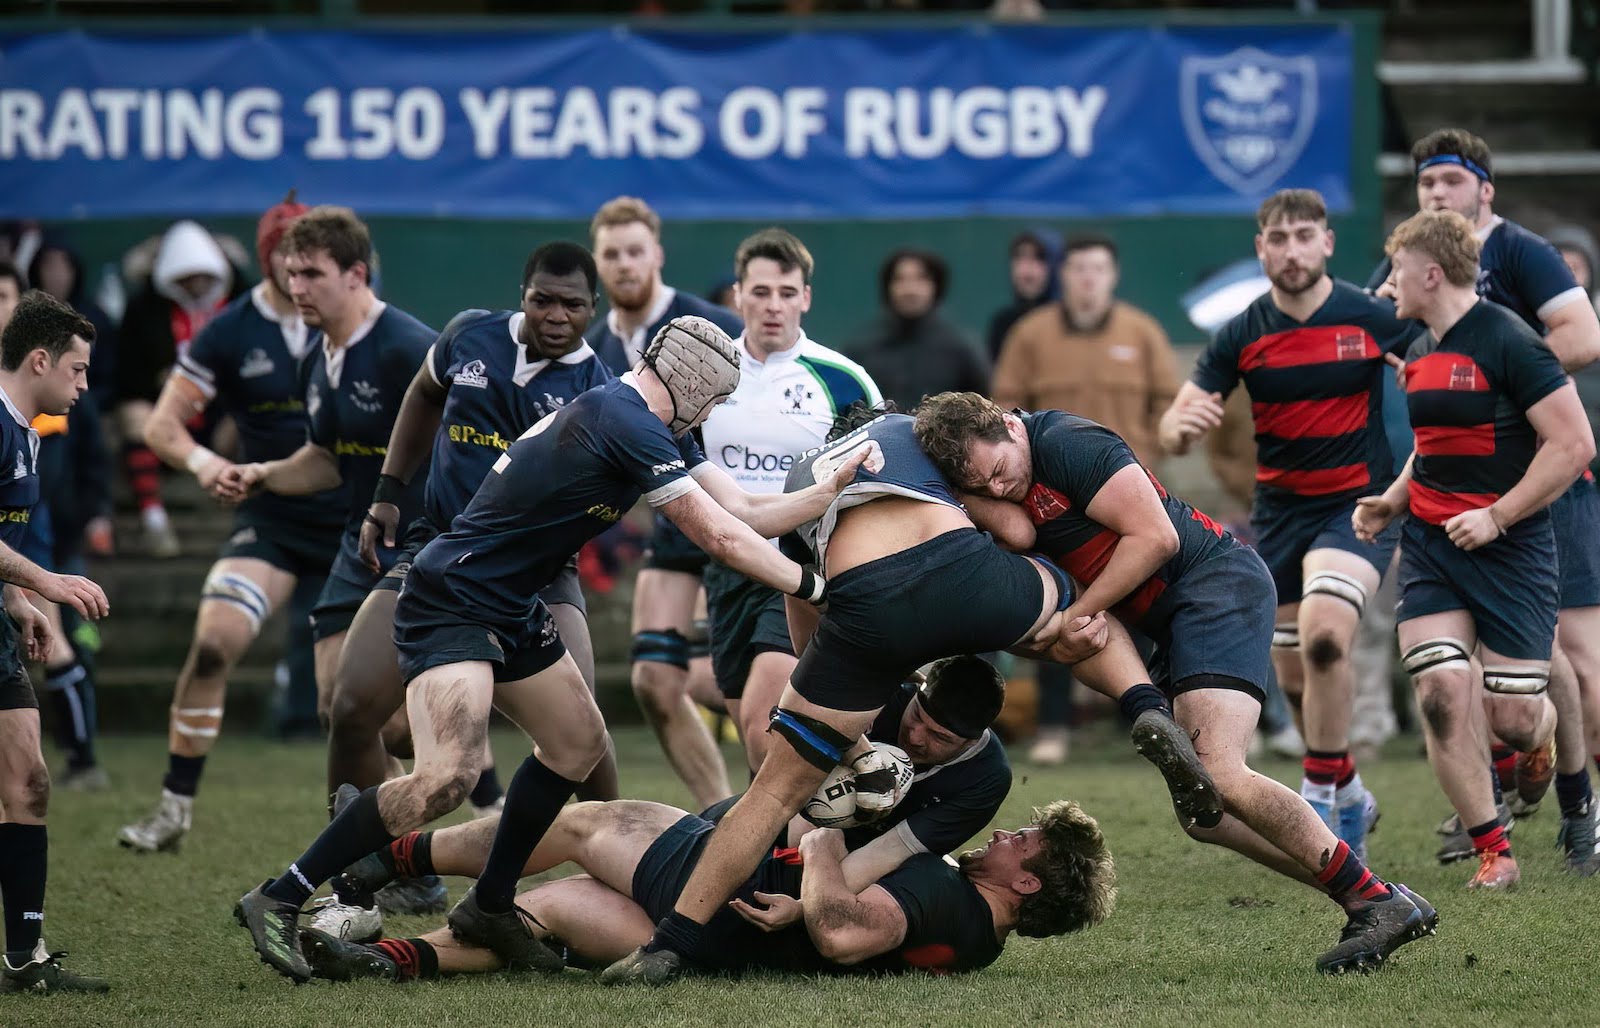 SMC Rugby playing against Oxford University in February 2023